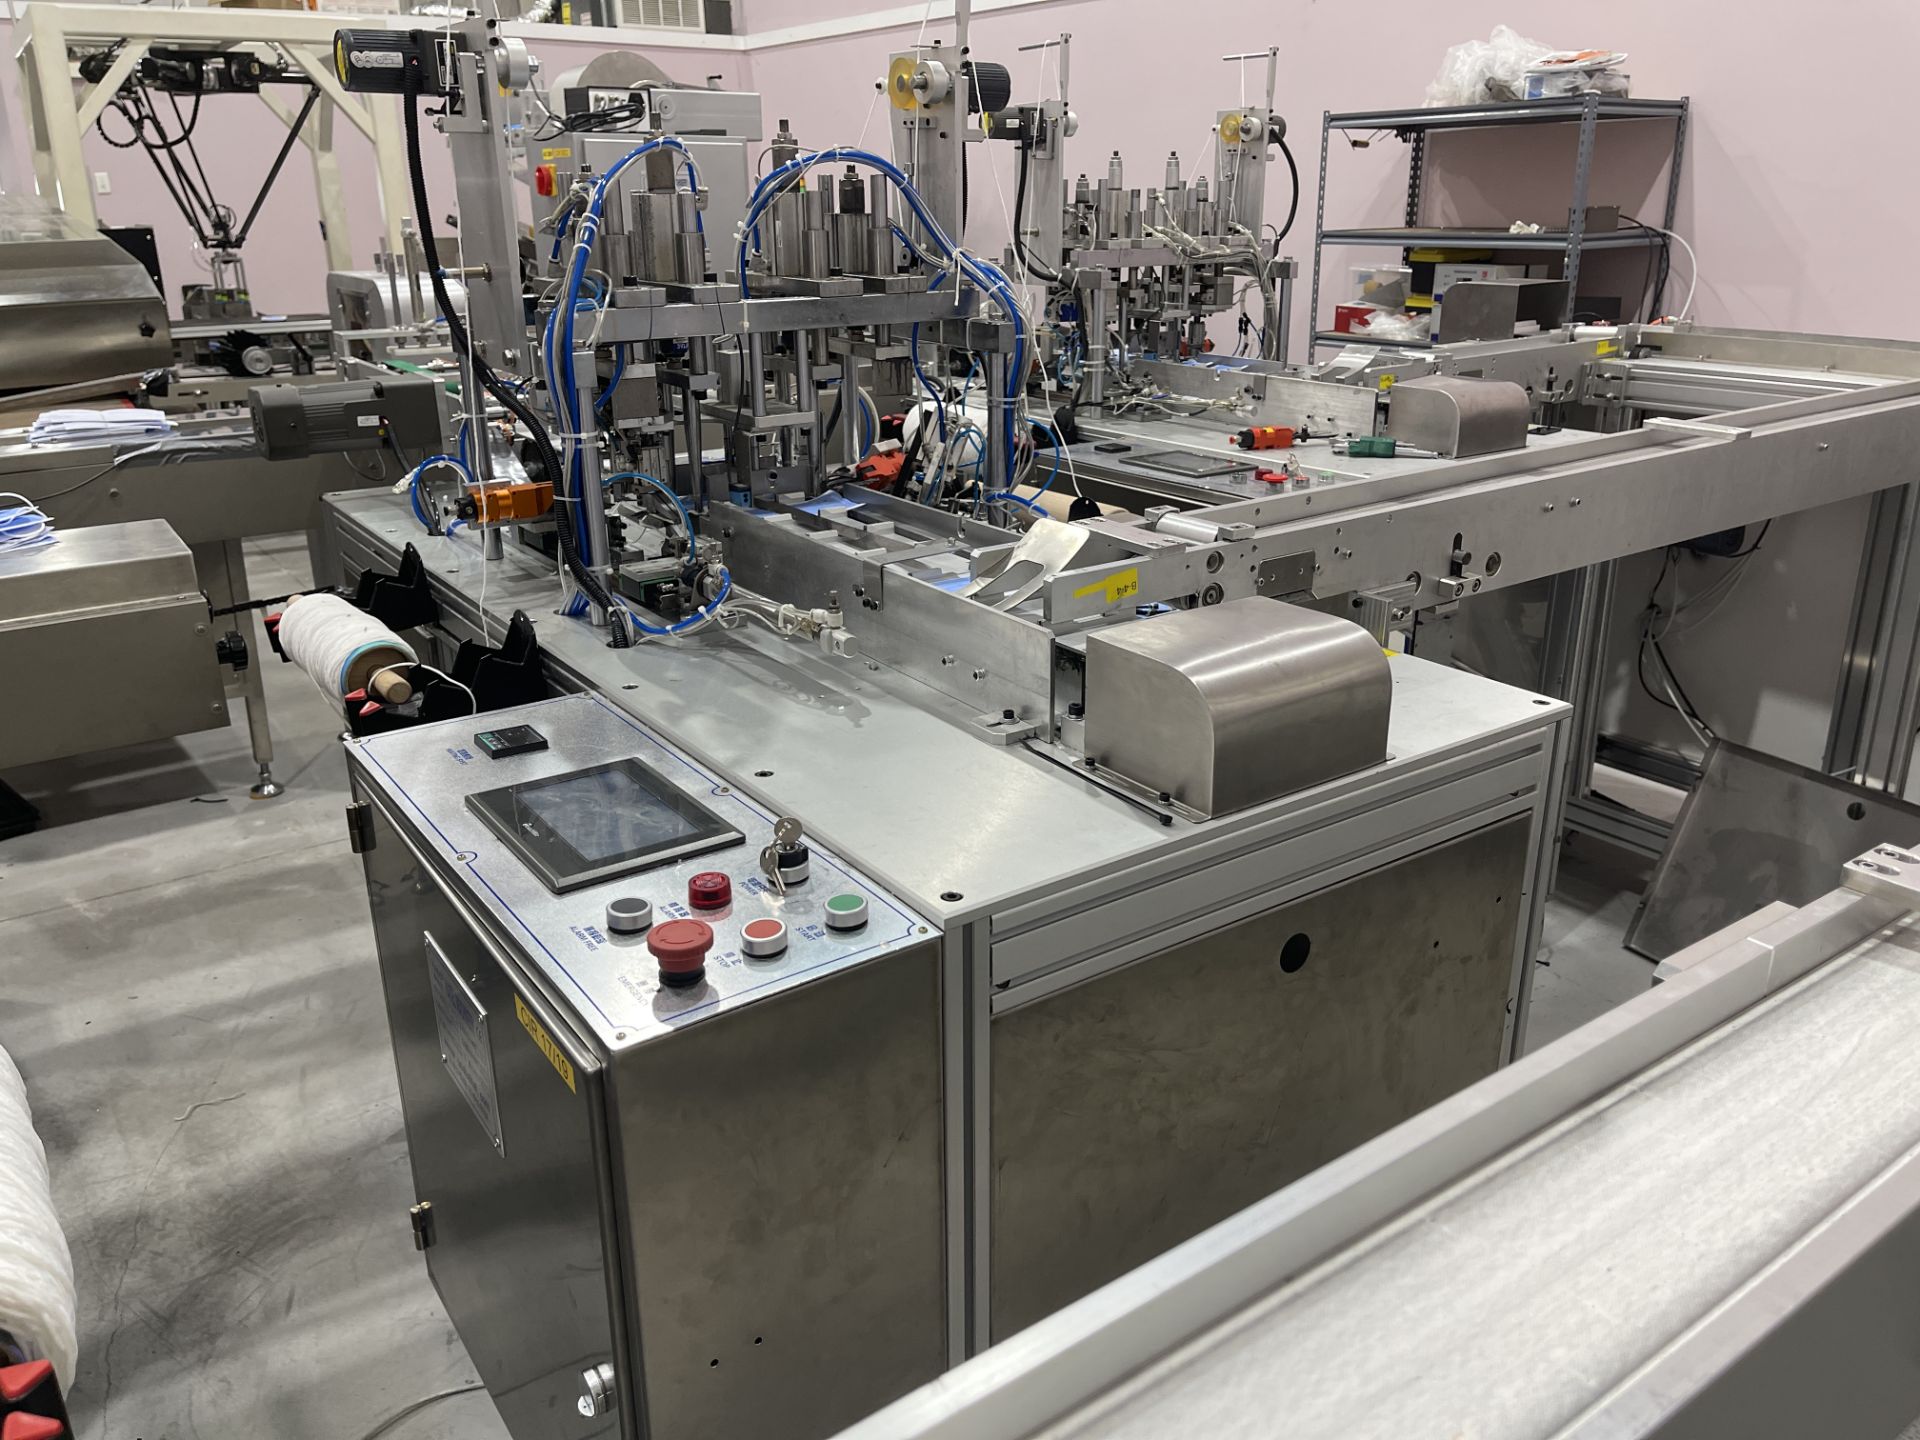 COMPLETE PACKAGE: 2020 3-Ply Disposable Medical Mask Assembly & Packaging Line Equipment, Includes: - Image 141 of 150